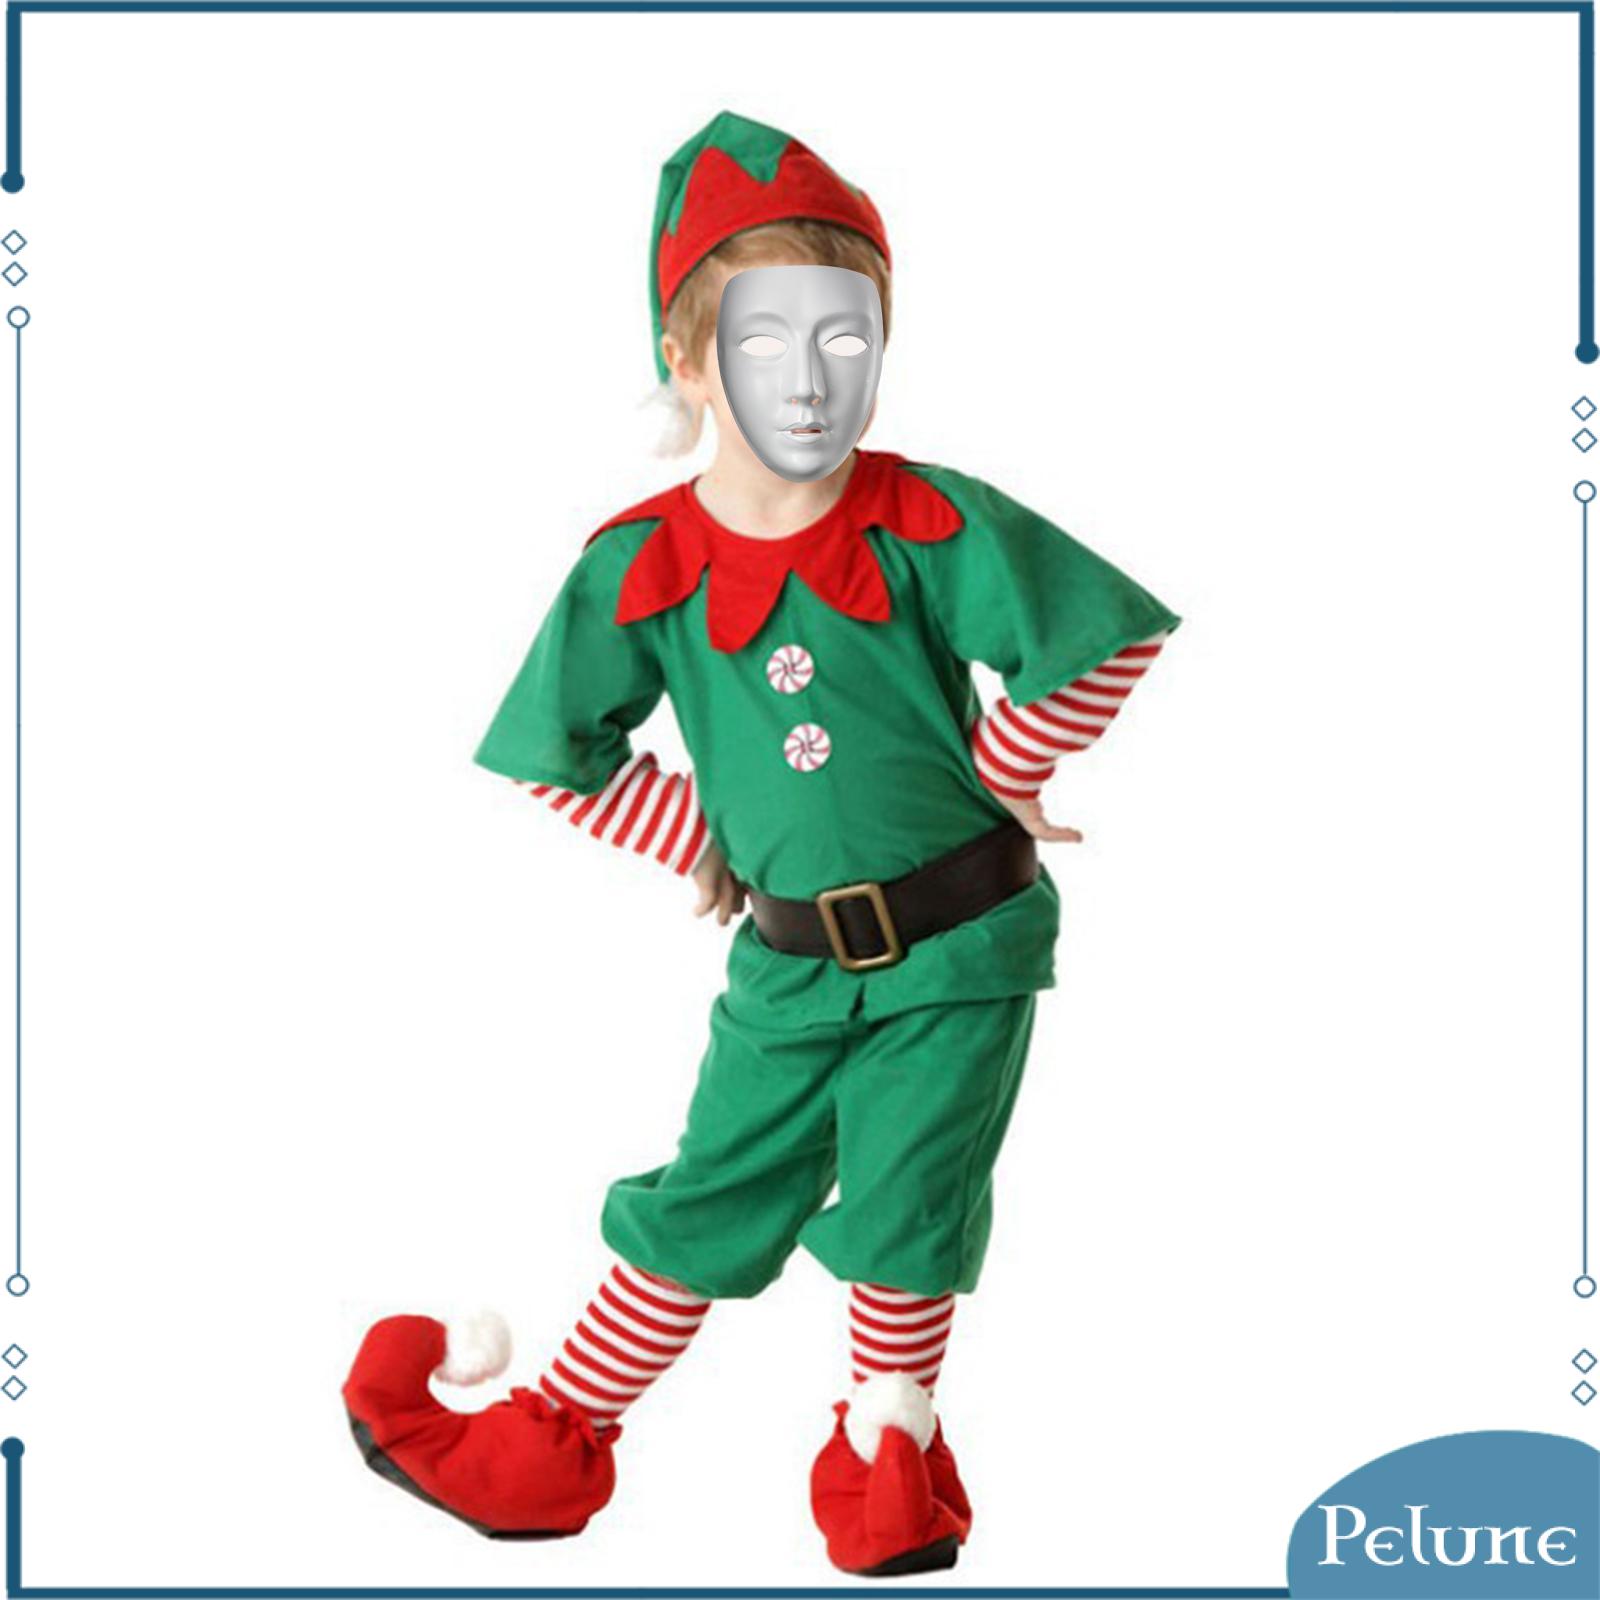 Pelune Elf Christmas Costume Clothes Photo Props Cosplay for Party